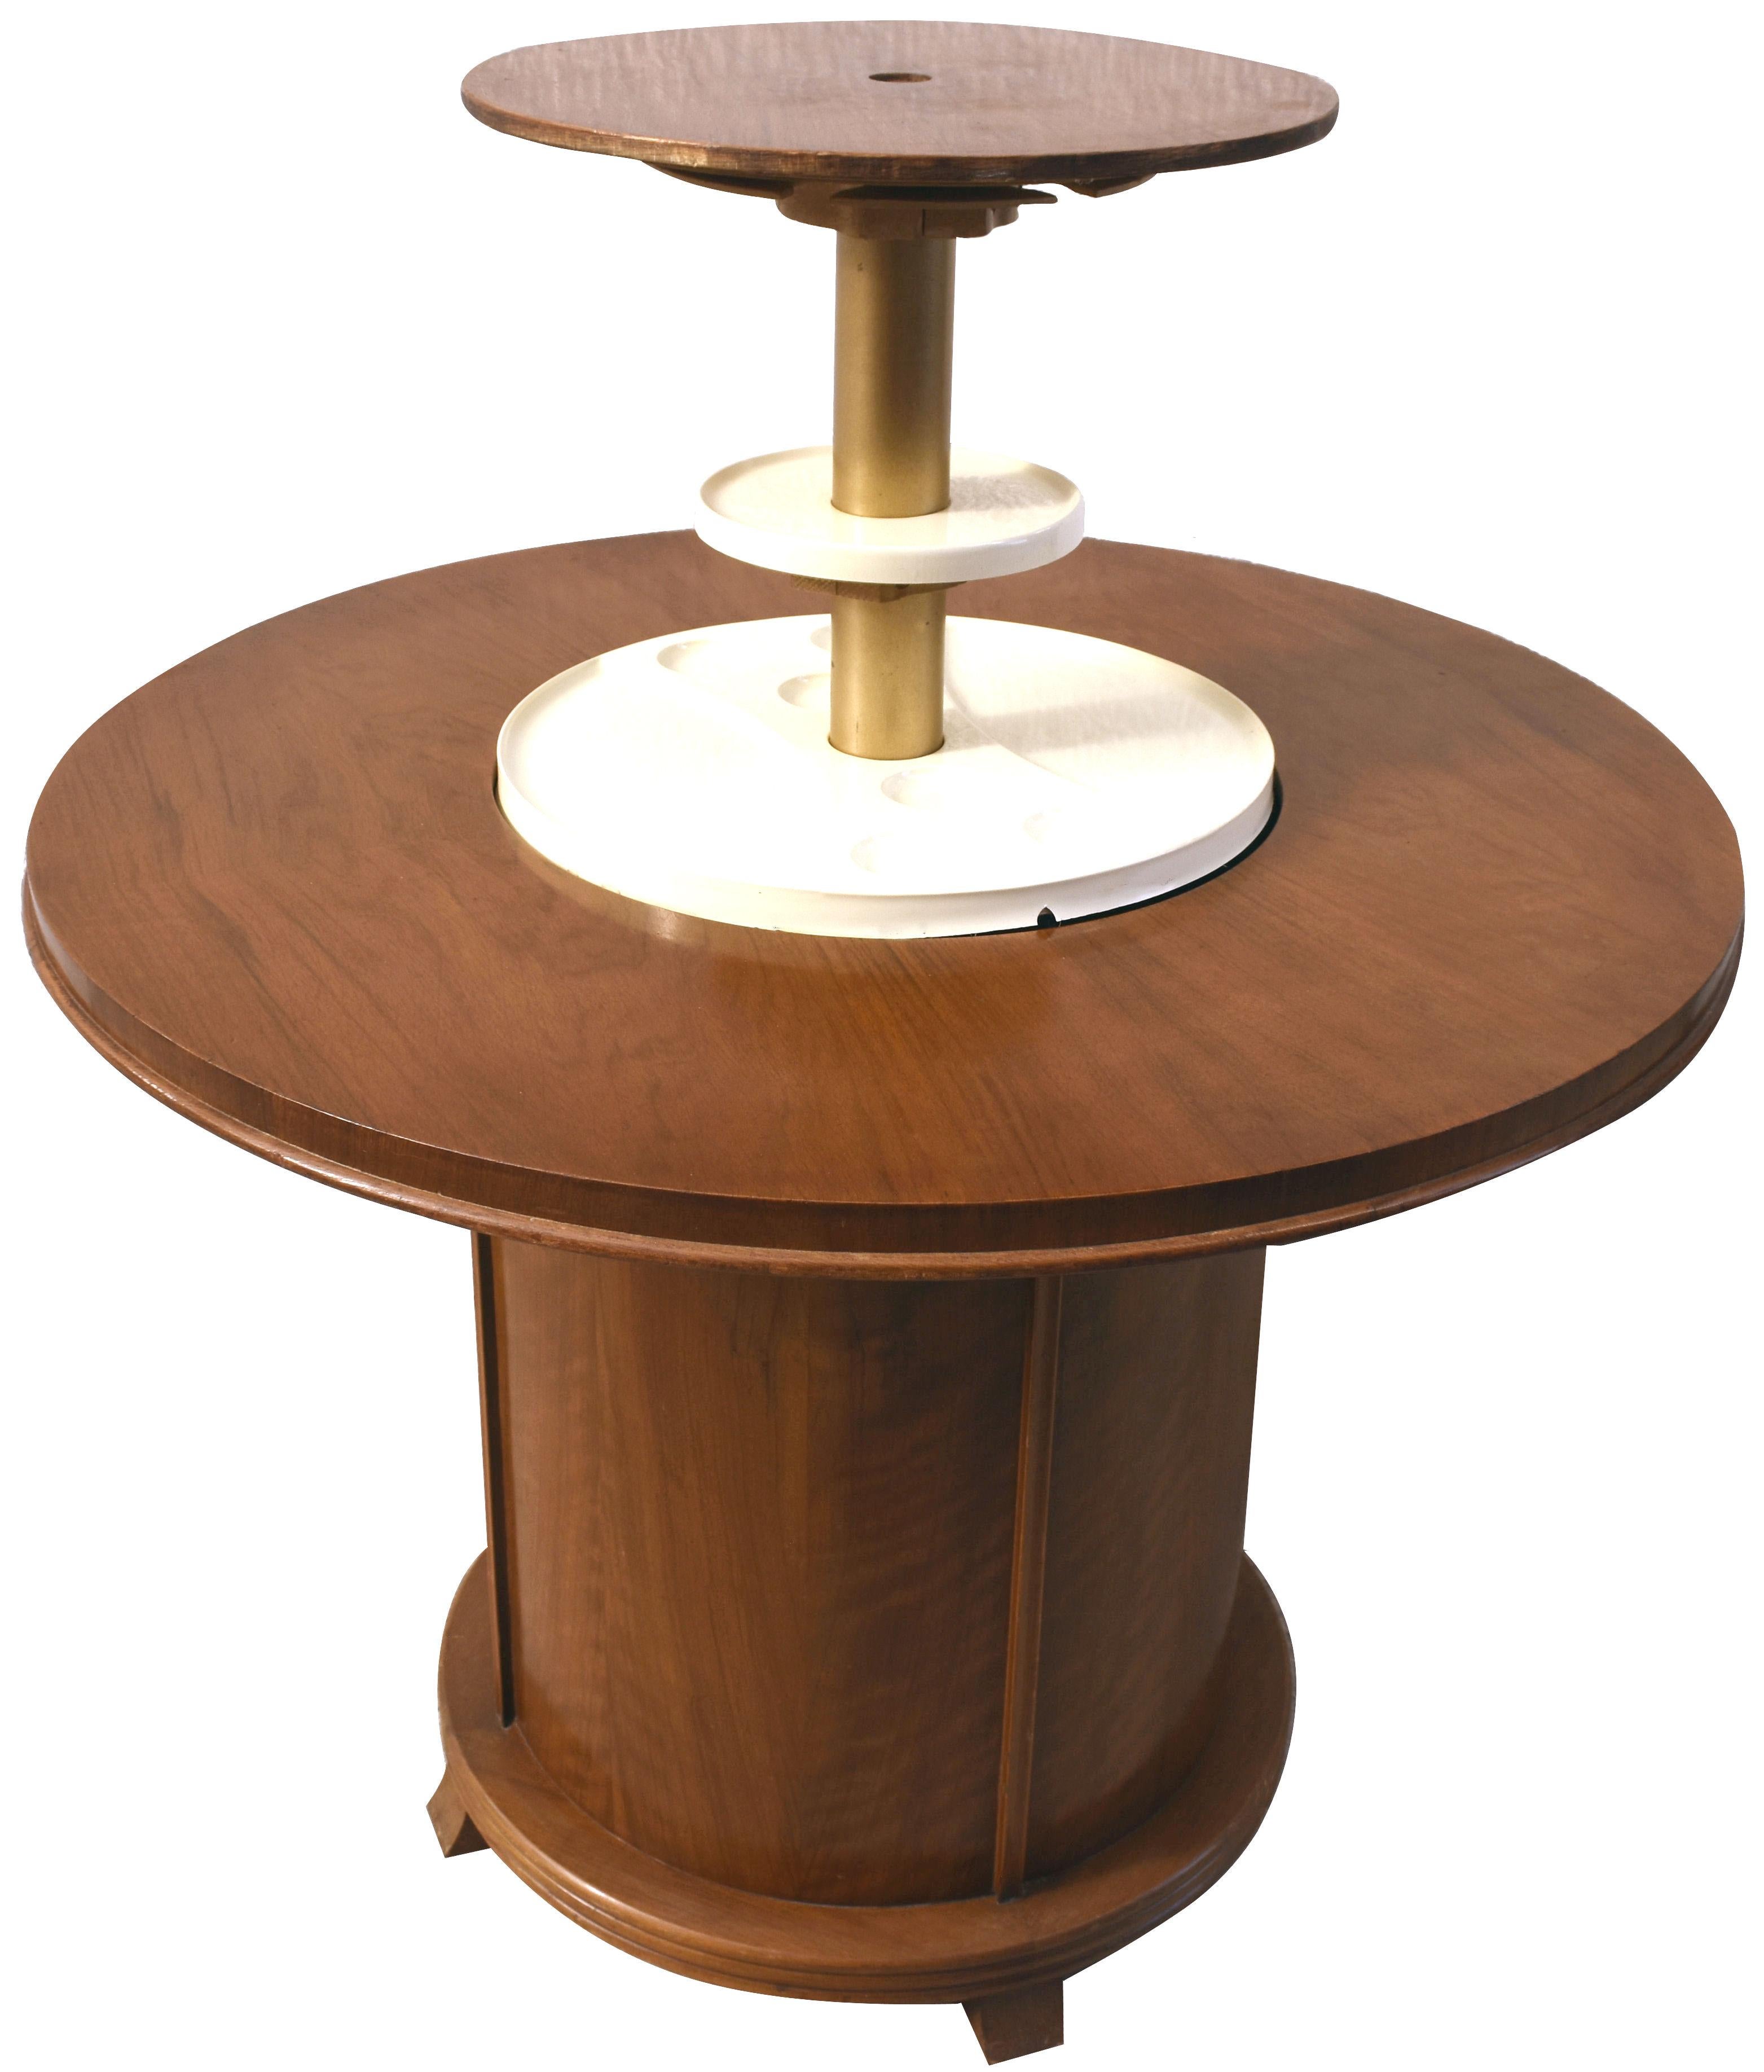 For your consideration is this rather fun and stylish original Art Deco English pop up cocktail table. When closed all you need do is press a central button which is centre to the table top and voila! up pops a second tier stored with glasses ready